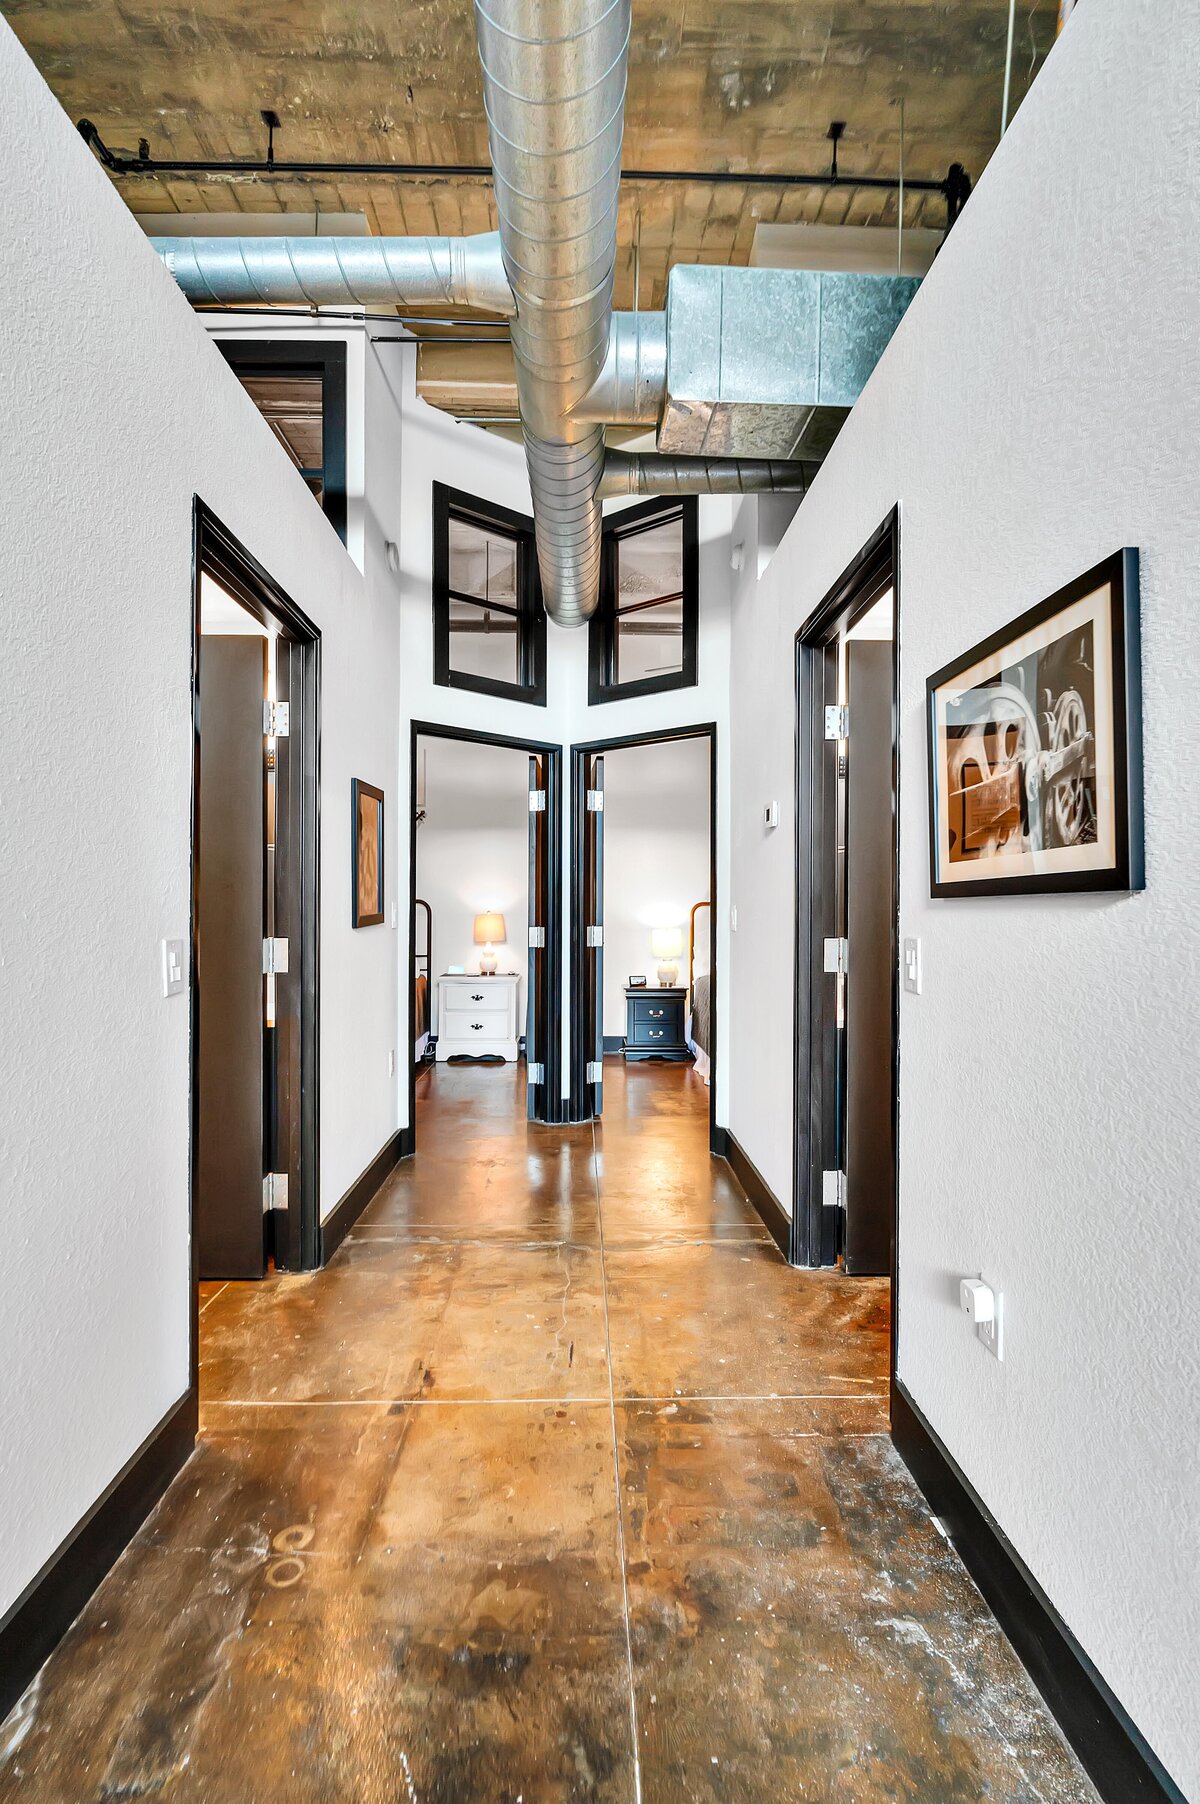 Hallway with view of the bedrooms at this two-bedroom, two-bathroom vacation rental condo in the historic Behrens building in the heart of the Magnolia Silo District in downtown Waco, TX.